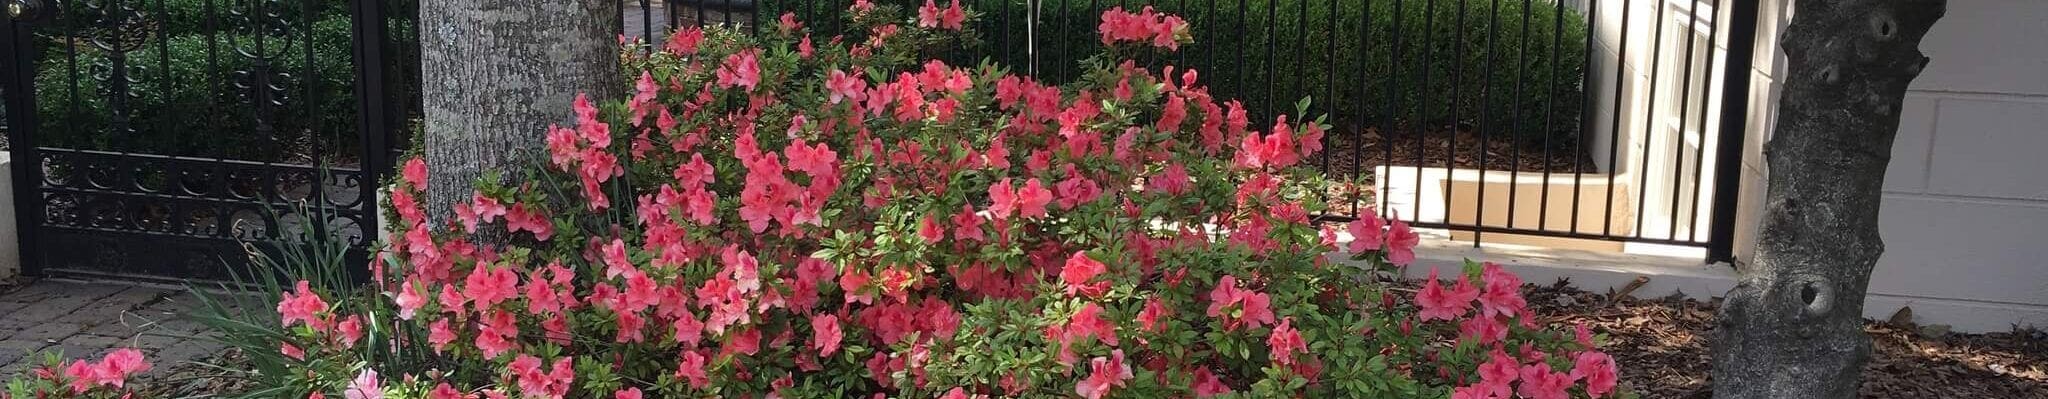 Flowery Branch, GA Landscaping Services